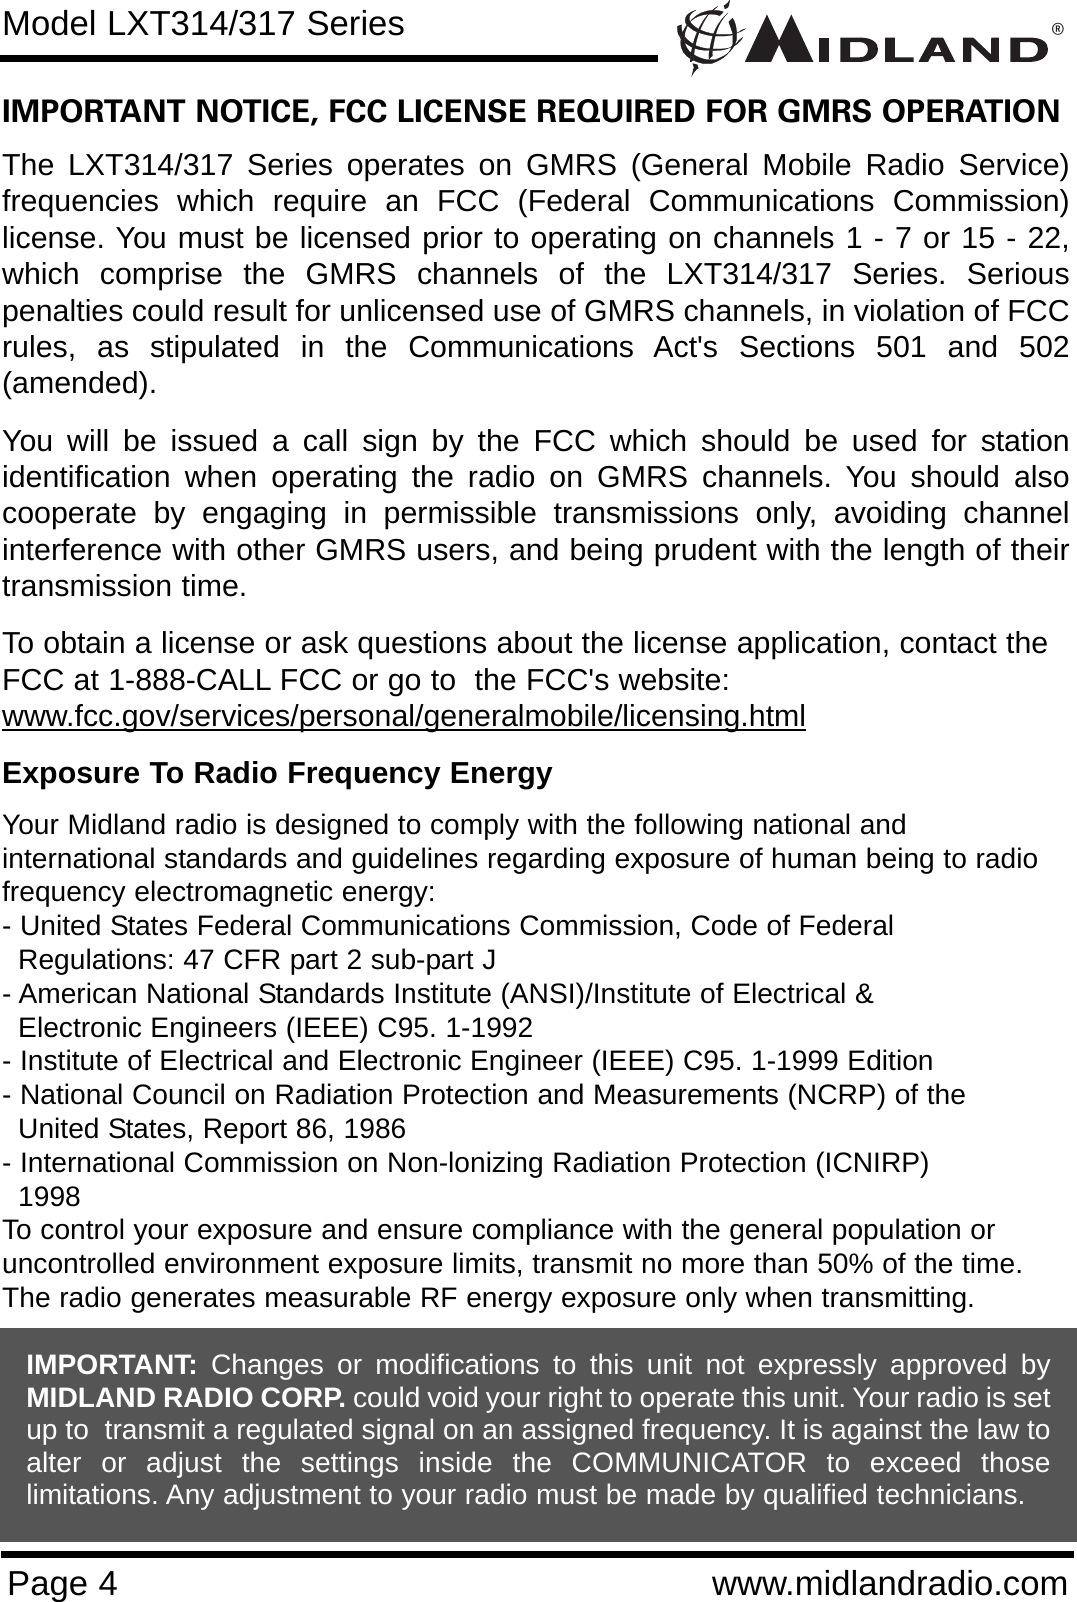 ®Page 4 www.midlandradio.comIMPORTANT NOTICE, FCC LICENSE REQUIRED FOR GMRS OPERATIONThe LXT314/317 Series operates on GMRS (General Mobile Radio Service)frequencies which require an FCC (Federal Communications Commission)license. You must be licensed prior to operating on channels 1 - 7 or 15 - 22,which comprise the GMRS channels of the LXT314/317 Series. Seriouspenalties could result for unlicensed use of GMRS channels, in violation of FCCrules, as stipulated in the Communications Act&apos;s Sections 501 and 502(amended).You will be issued a call sign by the FCC which should be used for stationidentification when operating the radio on GMRS channels. You should alsocooperate by engaging in permissible transmissions only, avoiding channelinterference with other GMRS users, and being prudent with the length of theirtransmission time.To obtain a license or ask questions about the license application, contact theFCC at 1-888-CALL FCC or go to  the FCC&apos;s website:www.fcc.gov/services/personal/generalmobile/licensing.htmlExposure To Radio Frequency EnergyYour Midland radio is designed to comply with the following national and international standards and guidelines regarding exposure of human being to radiofrequency electromagnetic energy:- United States Federal Communications Commission, Code of Federal Regulations: 47 CFR part 2 sub-part J- American National Standards Institute (ANSI)/Institute of Electrical &amp; Electronic Engineers (IEEE) C95. 1-1992- Institute of Electrical and Electronic Engineer (IEEE) C95. 1-1999 Edition- National Council on Radiation Protection and Measurements (NCRP) of the United States, Report 86, 1986- International Commission on Non-lonizing Radiation Protection (ICNIRP) 1998To control your exposure and ensure compliance with the general population oruncontrolled environment exposure limits, transmit no more than 50% of the time.The radio generates measurable RF energy exposure only when transmitting.Model LXT314/317 SeriesIMPORTANT: Changes or modifications to this unit not expressly approved byMIDLAND RADIO CORP. could void your right to operate this unit. Your radio is setup to  transmit a regulated signal on an assigned frequency. It is against the law toalter or adjust the settings inside the COMMUNICATOR to exceed thoselimitations. Any adjustment to your radio must be made by qualified technicians.